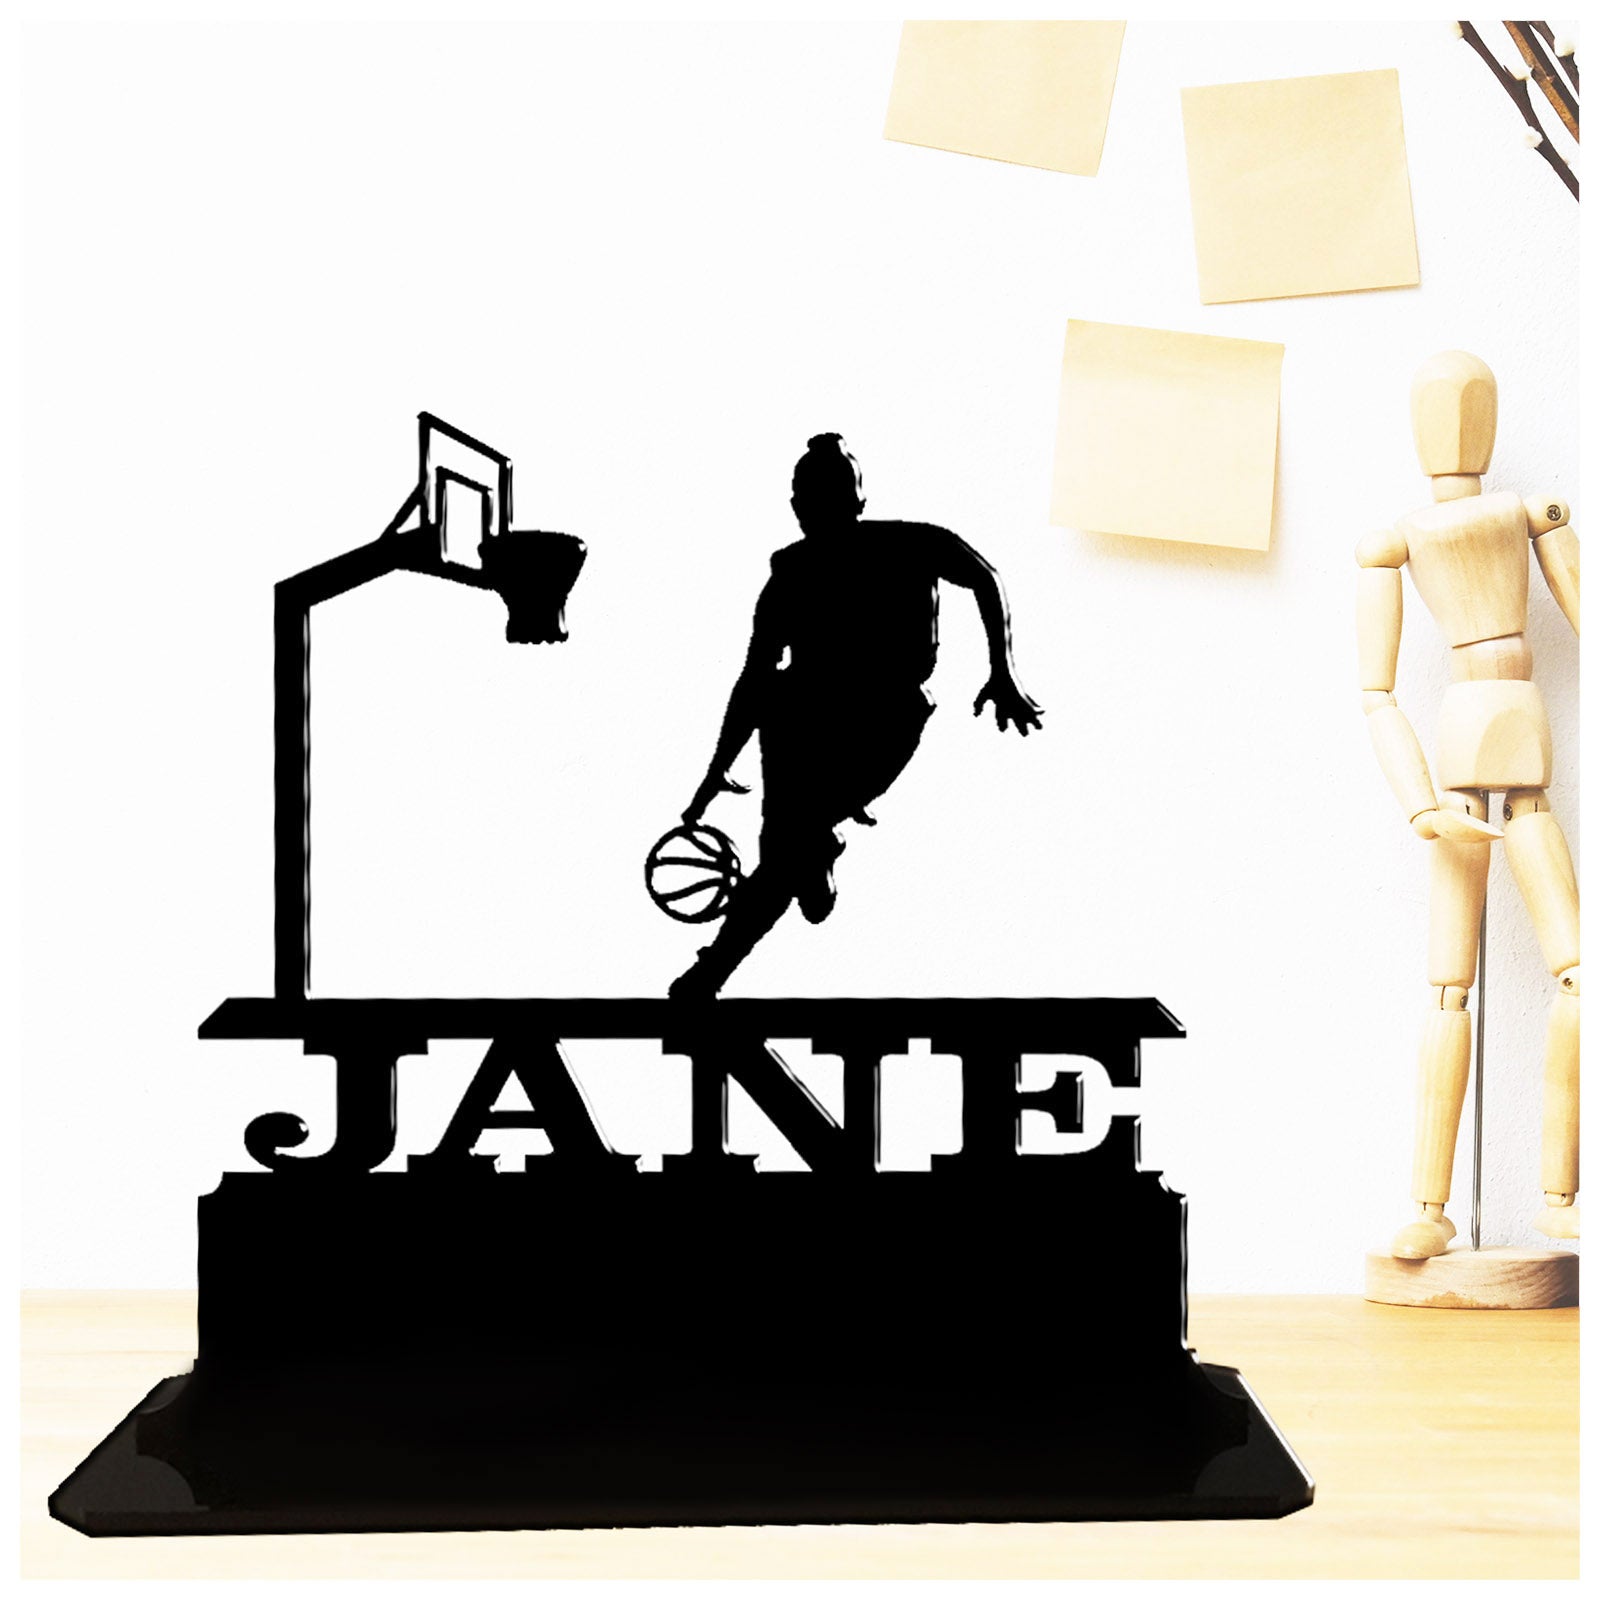 Personalised acrylic solo female basketball player birthday gift for her. This standalone present is keepsake ornamental plaque.